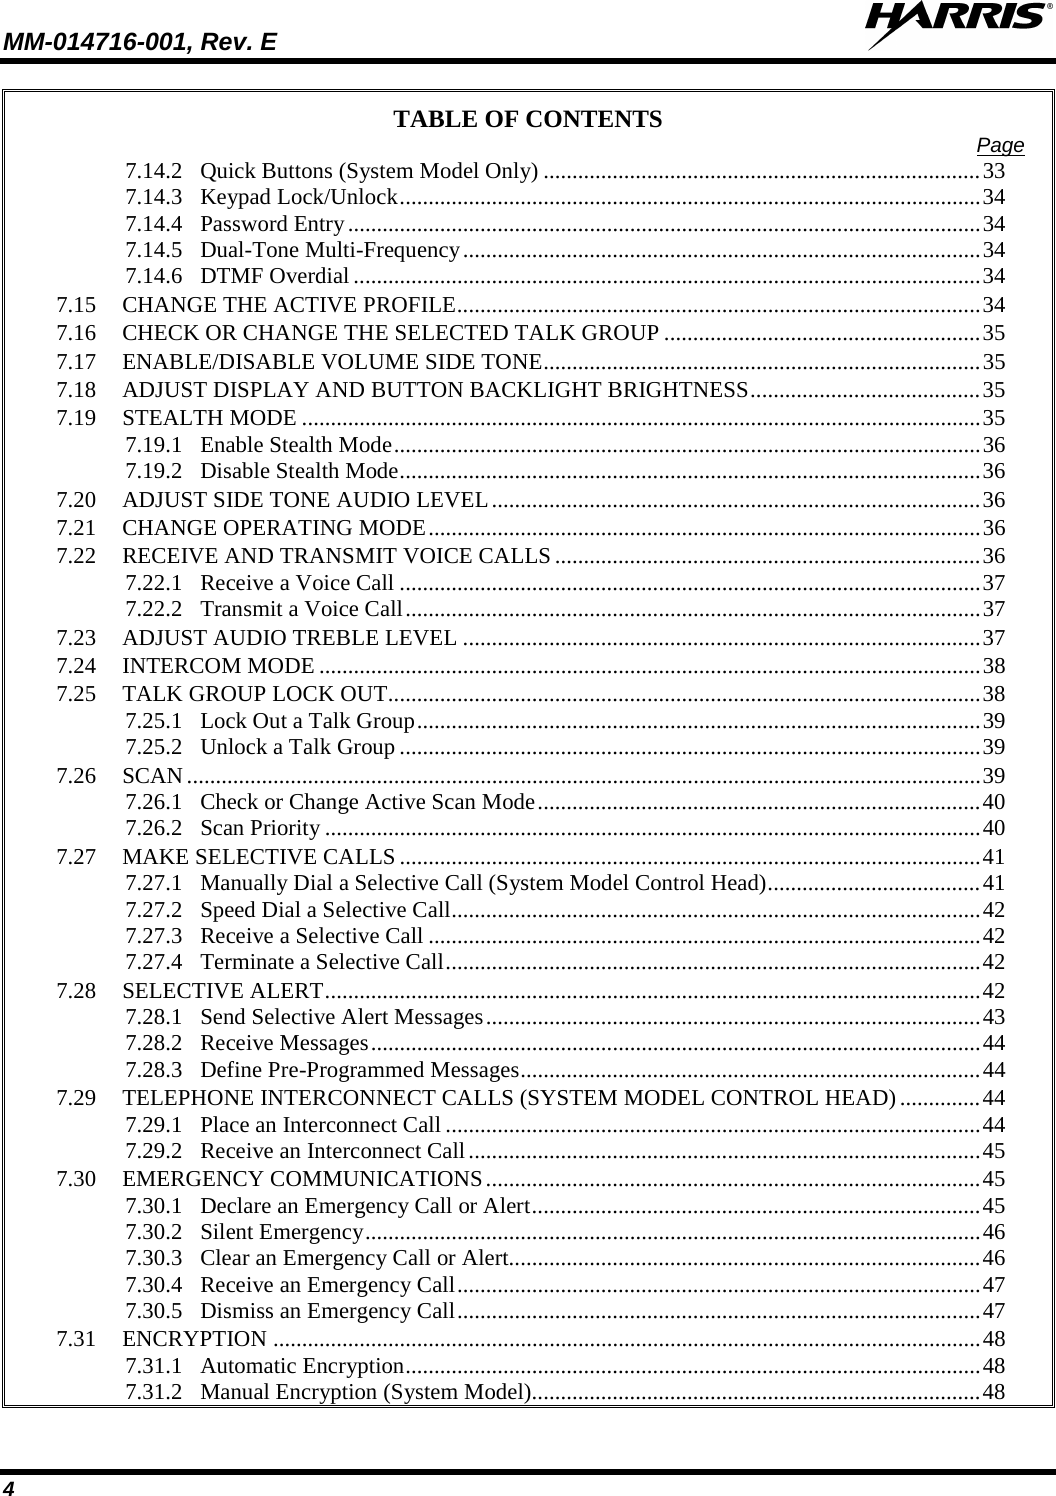 MM-014716-001, Rev. E  4 TABLE OF CONTENTS Page 7.14.2 Quick Buttons (System Model Only) ............................................................................ 33 7.14.3 Keypad Lock/Unlock ..................................................................................................... 34 7.14.4 Password Entry .............................................................................................................. 34 7.14.5 Dual-Tone Multi-Frequency .......................................................................................... 34 7.14.6 DTMF Overdial ............................................................................................................. 34 7.15 CHANGE THE ACTIVE PROFILE ........................................................................................... 34 7.16 CHECK OR CHANGE THE SELECTED TALK GROUP ....................................................... 35 7.17 ENABLE/DISABLE VOLUME SIDE TONE ............................................................................ 35 7.18 ADJUST DISPLAY AND BUTTON BACKLIGHT BRIGHTNESS ........................................ 35 7.19 STEALTH MODE ...................................................................................................................... 35 7.19.1 Enable Stealth Mode ...................................................................................................... 36 7.19.2 Disable Stealth Mode ..................................................................................................... 36 7.20 ADJUST SIDE TONE AUDIO LEVEL ..................................................................................... 36 7.21 CHANGE OPERATING MODE ................................................................................................ 36 7.22 RECEIVE AND TRANSMIT VOICE CALLS .......................................................................... 36 7.22.1 Receive a Voice Call ..................................................................................................... 37 7.22.2 Transmit a Voice Call .................................................................................................... 37 7.23 ADJUST AUDIO TREBLE LEVEL .......................................................................................... 37 7.24 INTERCOM MODE ................................................................................................................... 38 7.25 TALK GROUP LOCK OUT ....................................................................................................... 38 7.25.1 Lock Out a Talk Group .................................................................................................. 39 7.25.2 Unlock a Talk Group ..................................................................................................... 39 7.26 SCAN .......................................................................................................................................... 39 7.26.1 Check or Change Active Scan Mode ............................................................................. 40 7.26.2 Scan Priority .................................................................................................................. 40 7.27 MAKE SELECTIVE CALLS ..................................................................................................... 41 7.27.1 Manually Dial a Selective Call (System Model Control Head) ..................................... 41 7.27.2 Speed Dial a Selective Call ............................................................................................ 42 7.27.3 Receive a Selective Call ................................................................................................ 42 7.27.4 Terminate a Selective Call ............................................................................................. 42 7.28 SELECTIVE ALERT .................................................................................................................. 42 7.28.1 Send Selective Alert Messages ...................................................................................... 43 7.28.2 Receive Messages .......................................................................................................... 44 7.28.3 Define Pre-Programmed Messages ................................................................................ 44 7.29 TELEPHONE INTERCONNECT CALLS (SYSTEM MODEL CONTROL HEAD) .............. 44 7.29.1 Place an Interconnect Call ............................................................................................. 44 7.29.2 Receive an Interconnect Call ......................................................................................... 45 7.30 EMERGENCY COMMUNICATIONS ...................................................................................... 45 7.30.1 Declare an Emergency Call or Alert .............................................................................. 45 7.30.2 Silent Emergency ........................................................................................................... 46 7.30.3 Clear an Emergency Call or Alert.................................................................................. 46 7.30.4 Receive an Emergency Call ........................................................................................... 47 7.30.5 Dismiss an Emergency Call ........................................................................................... 47 7.31 ENCRYPTION ........................................................................................................................... 48 7.31.1 Automatic Encryption .................................................................................................... 48 7.31.2 Manual Encryption (System Model).............................................................................. 48 